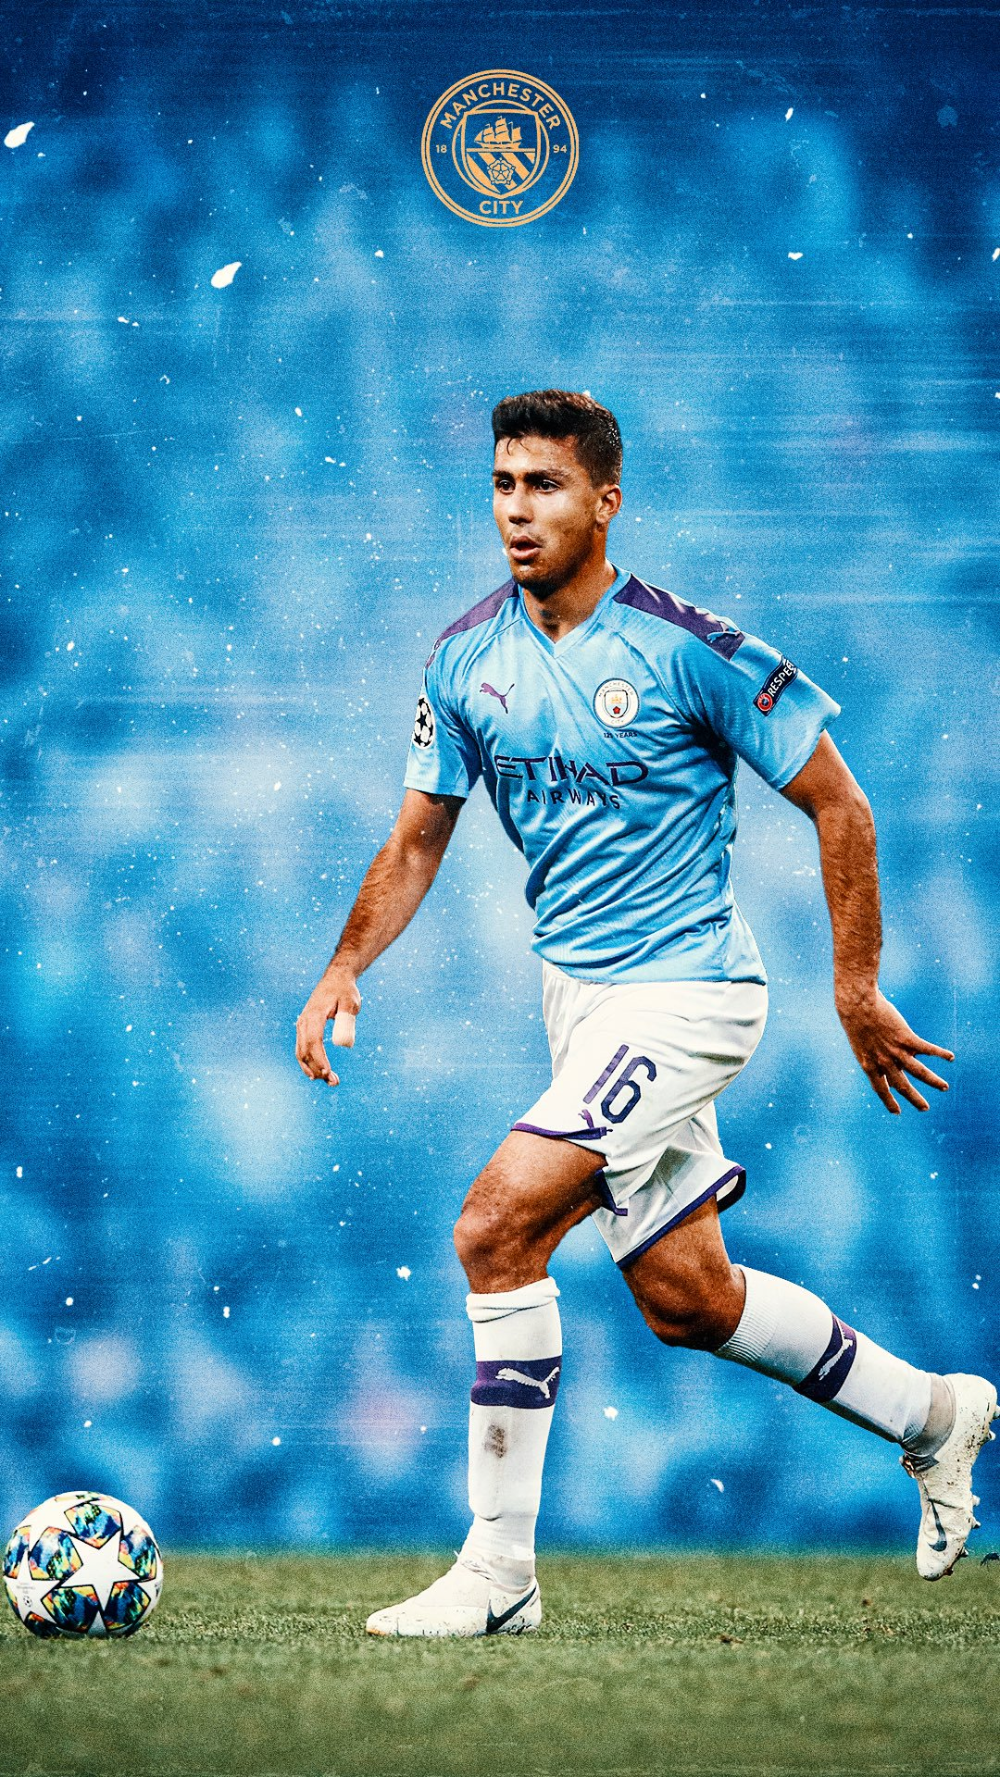 Manchester City on Twitter. Manchester city, Manchester city football club, Manchester city wallpaper